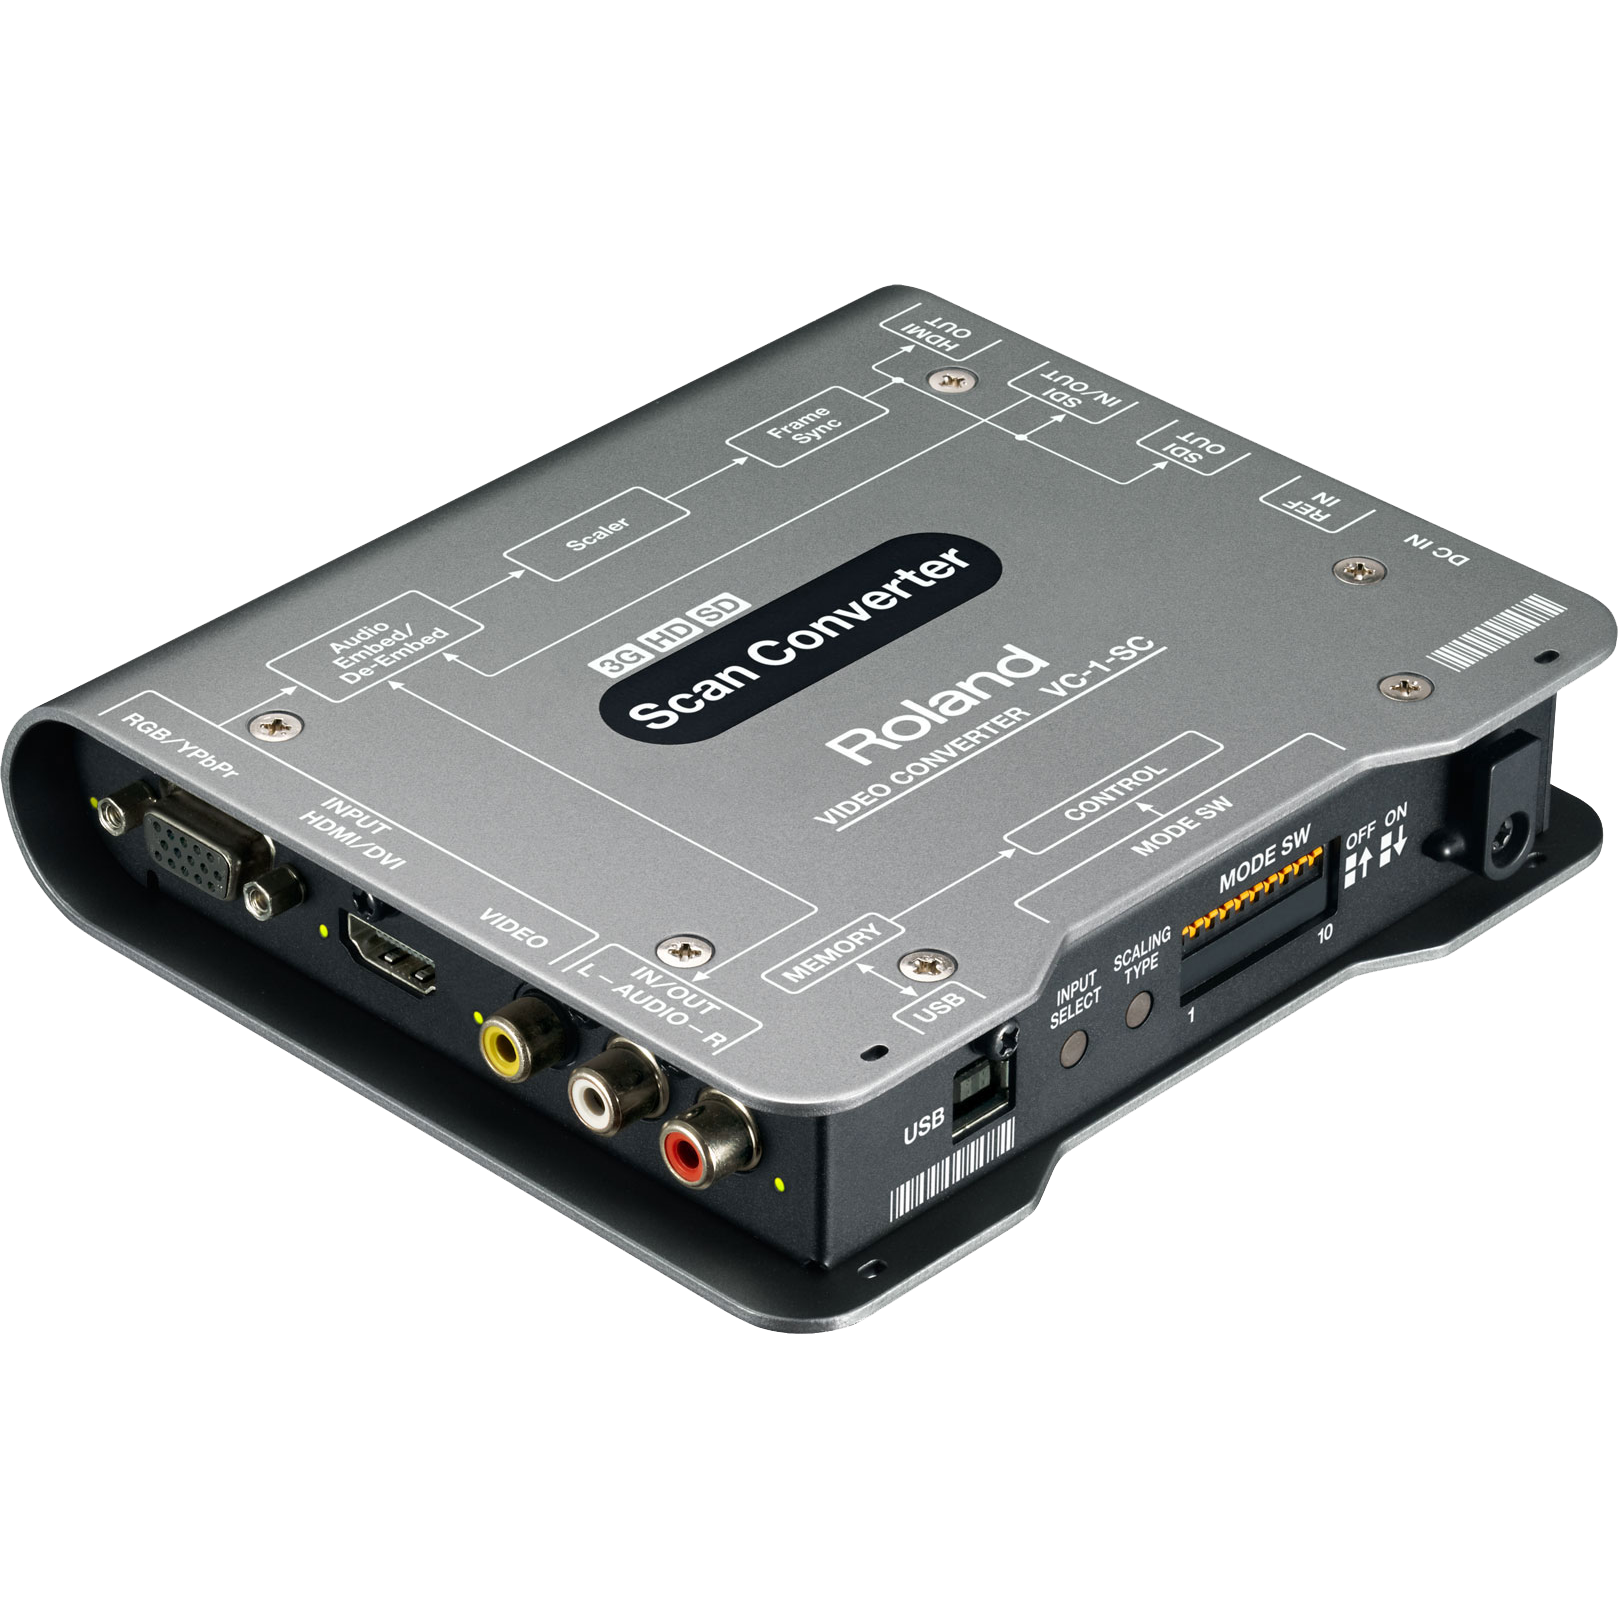 Roland VC-1-SC Up/Down/Cross Scan Converter to/from SDI/HDMI tourPack with BYFP ipCase